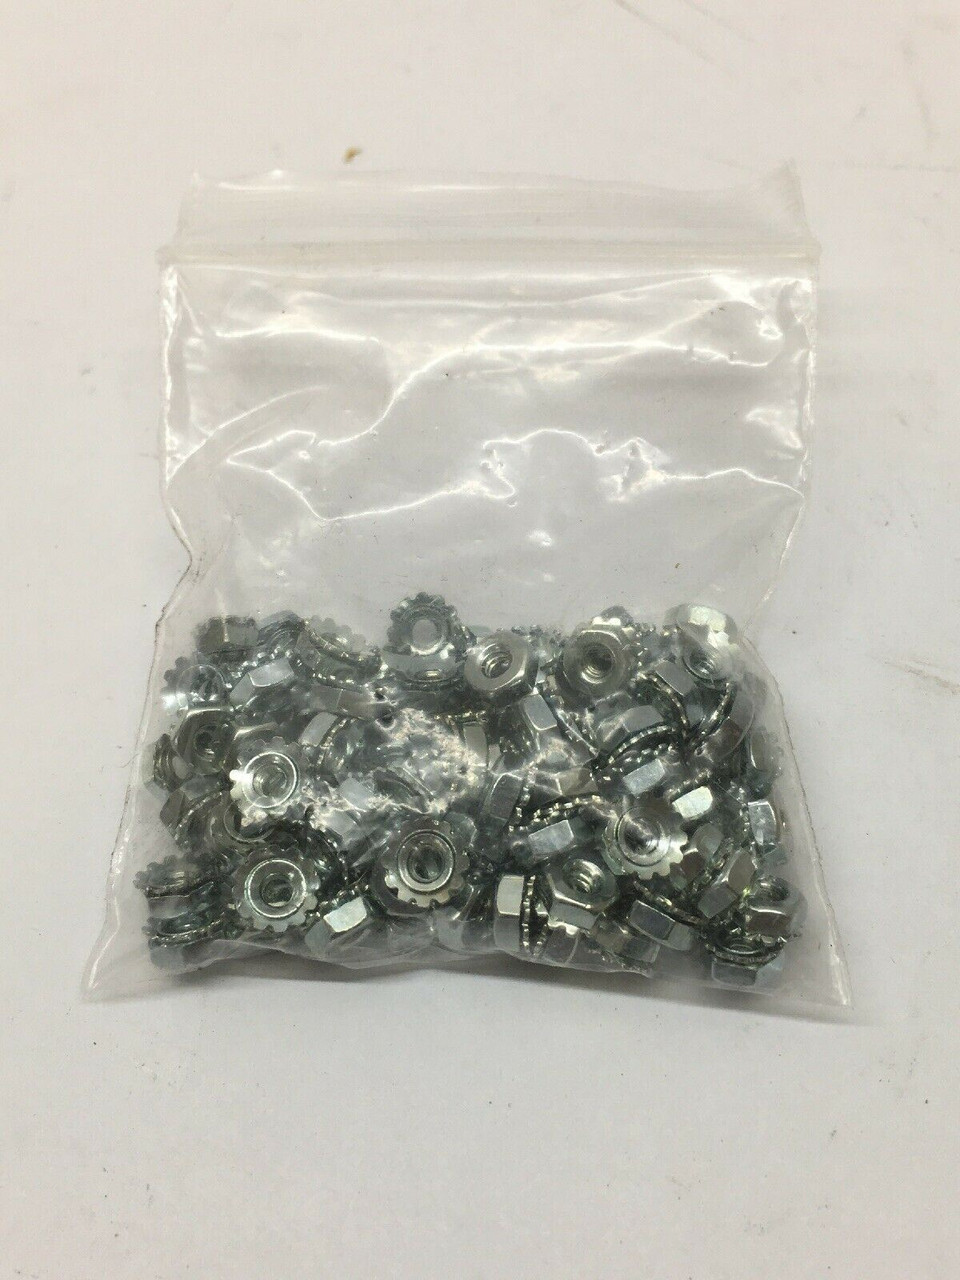 Assembled Washer Plain Nut 69-561-1 Lot of 100 